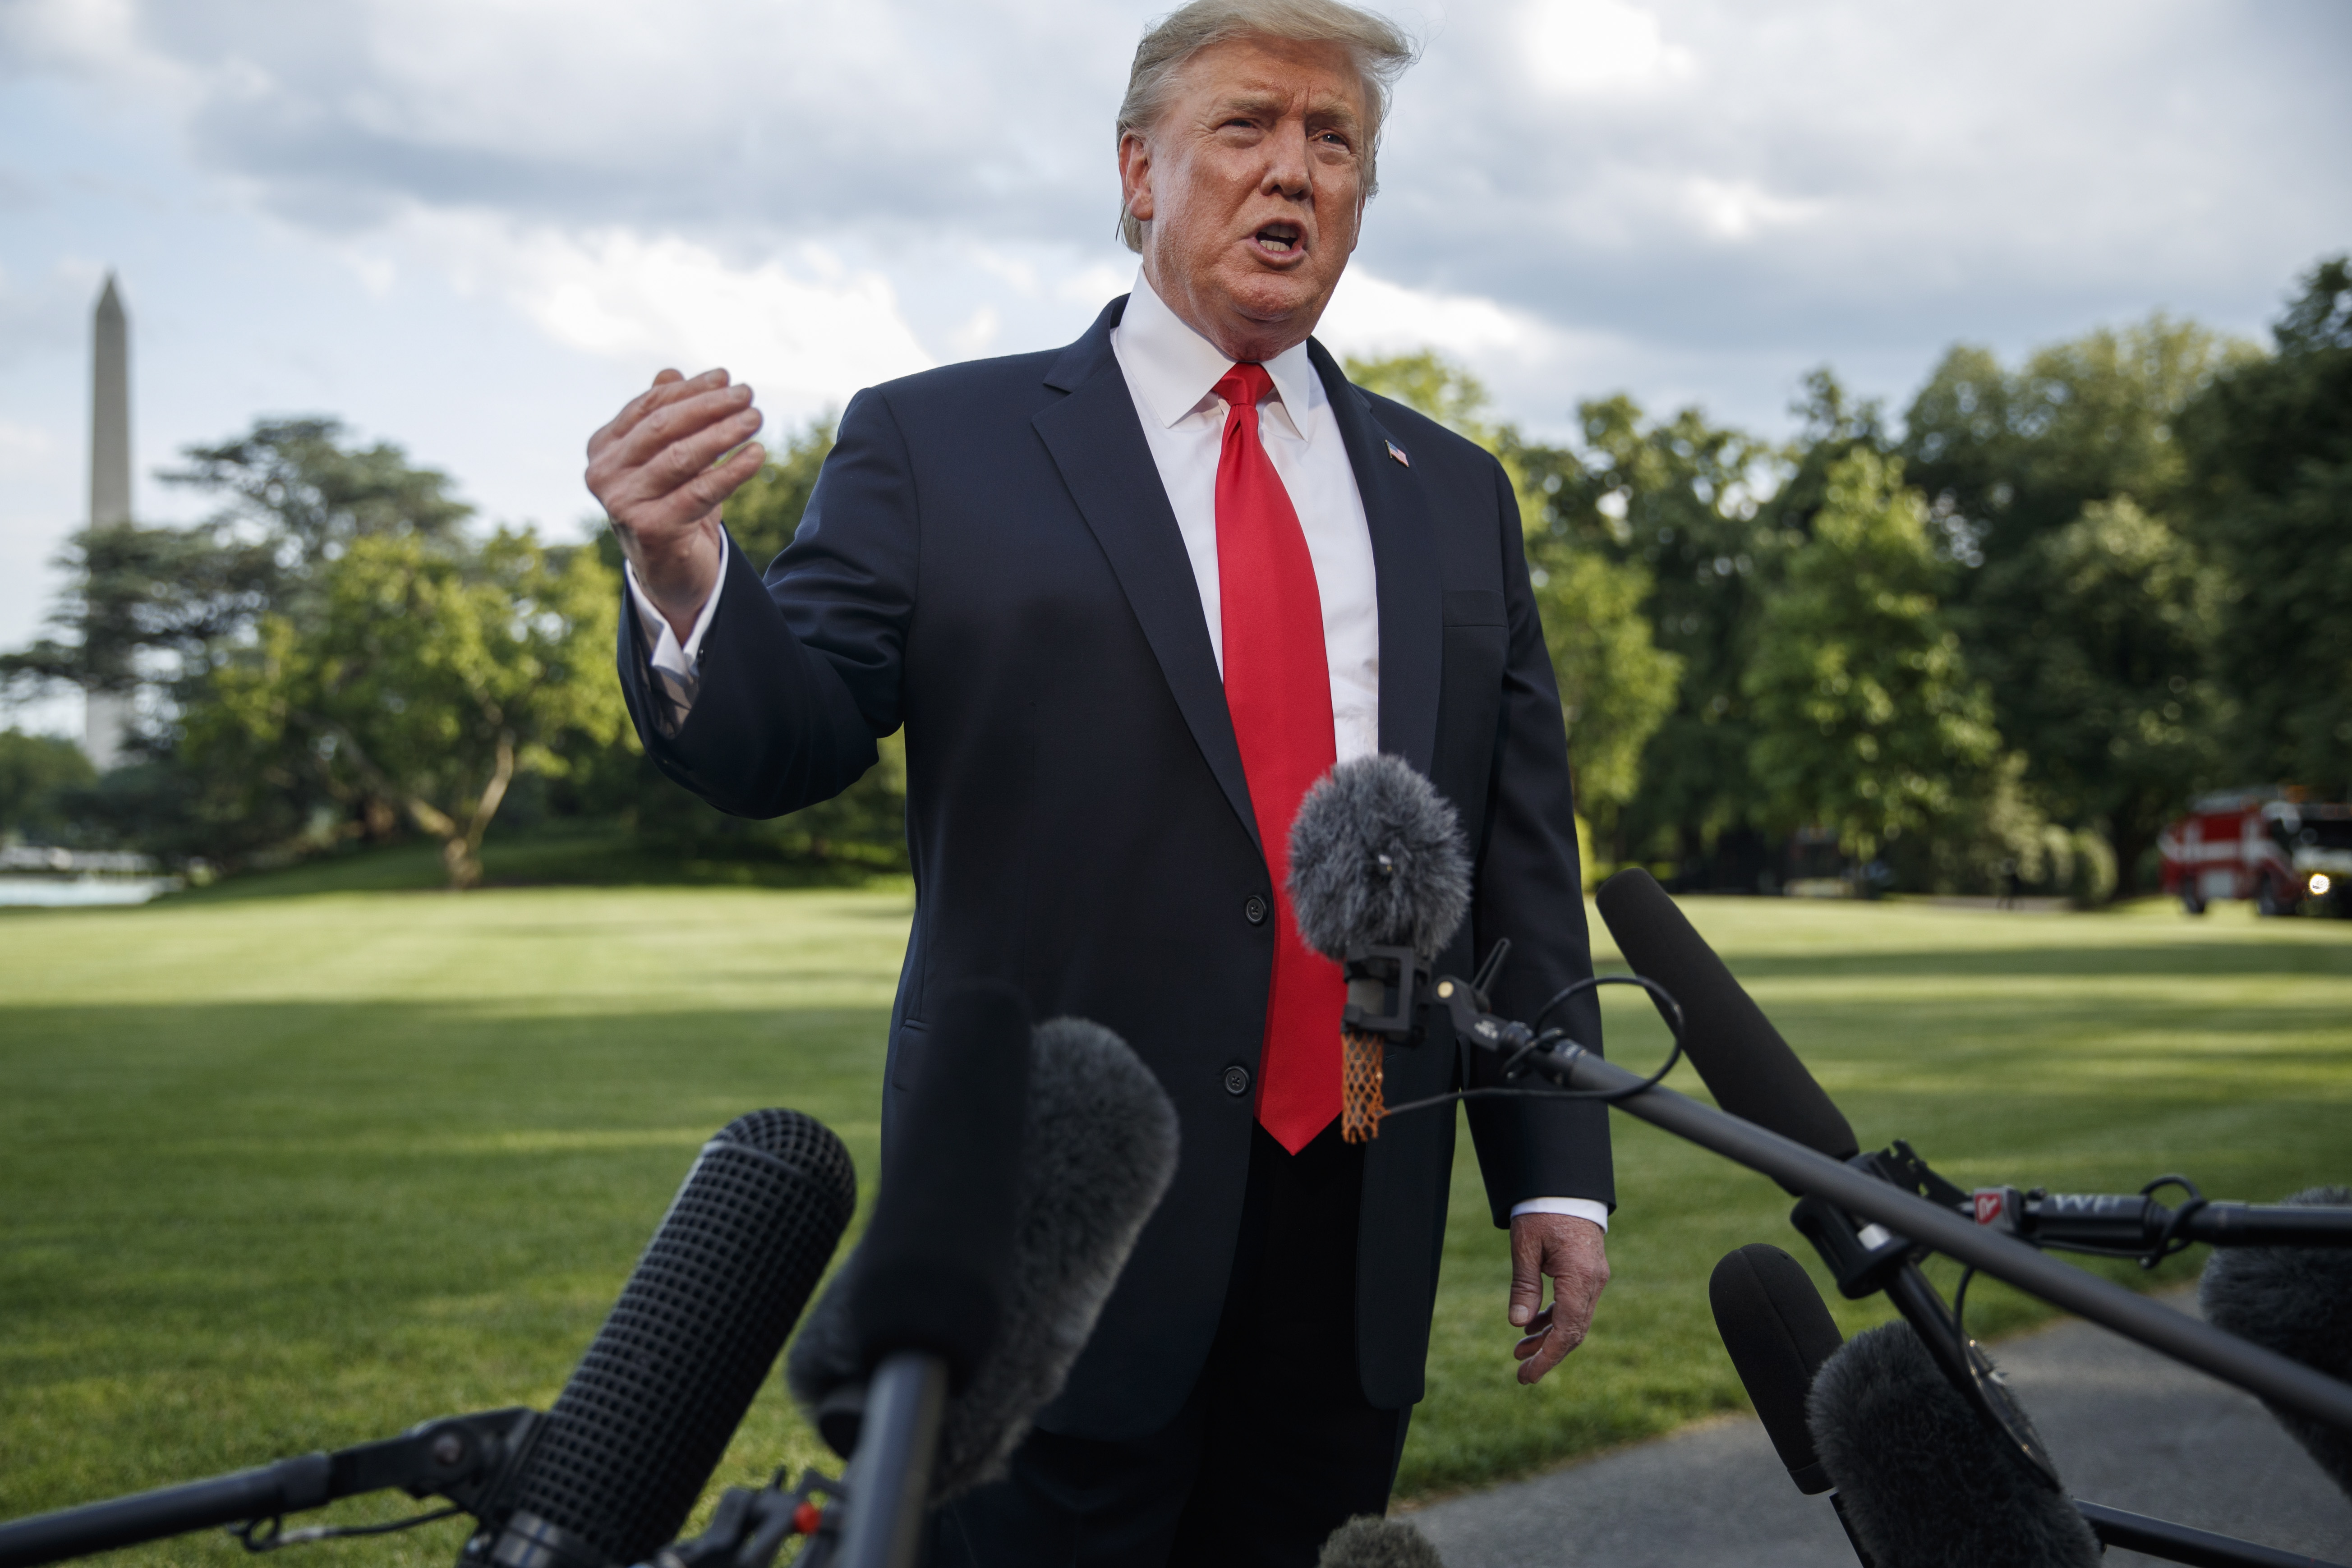 epa07588039 US President Donald J. Trump responds to a question from the news media as he walks to board Marine One on the South Lawn of the White House in Washington, DC, USA, 20 May 2019. President Trump is traveling to Pennsylvania for a political rally.  EPA/SHAWN THEW